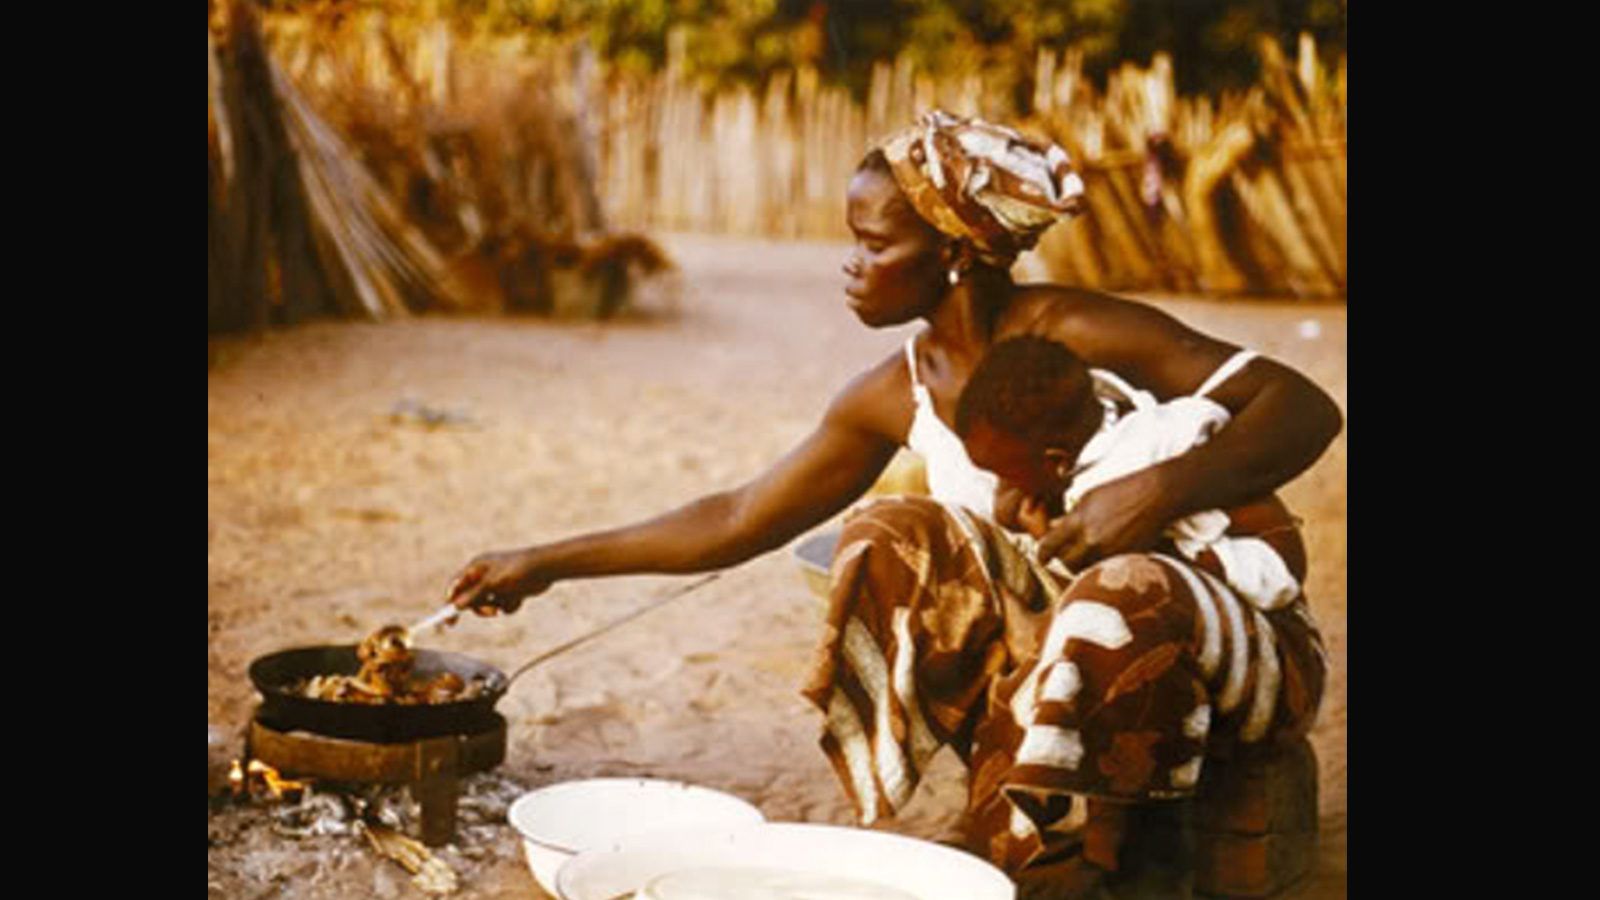 A woman holding a baby in one hand sits before an open fire cooking chicken in a rural African village